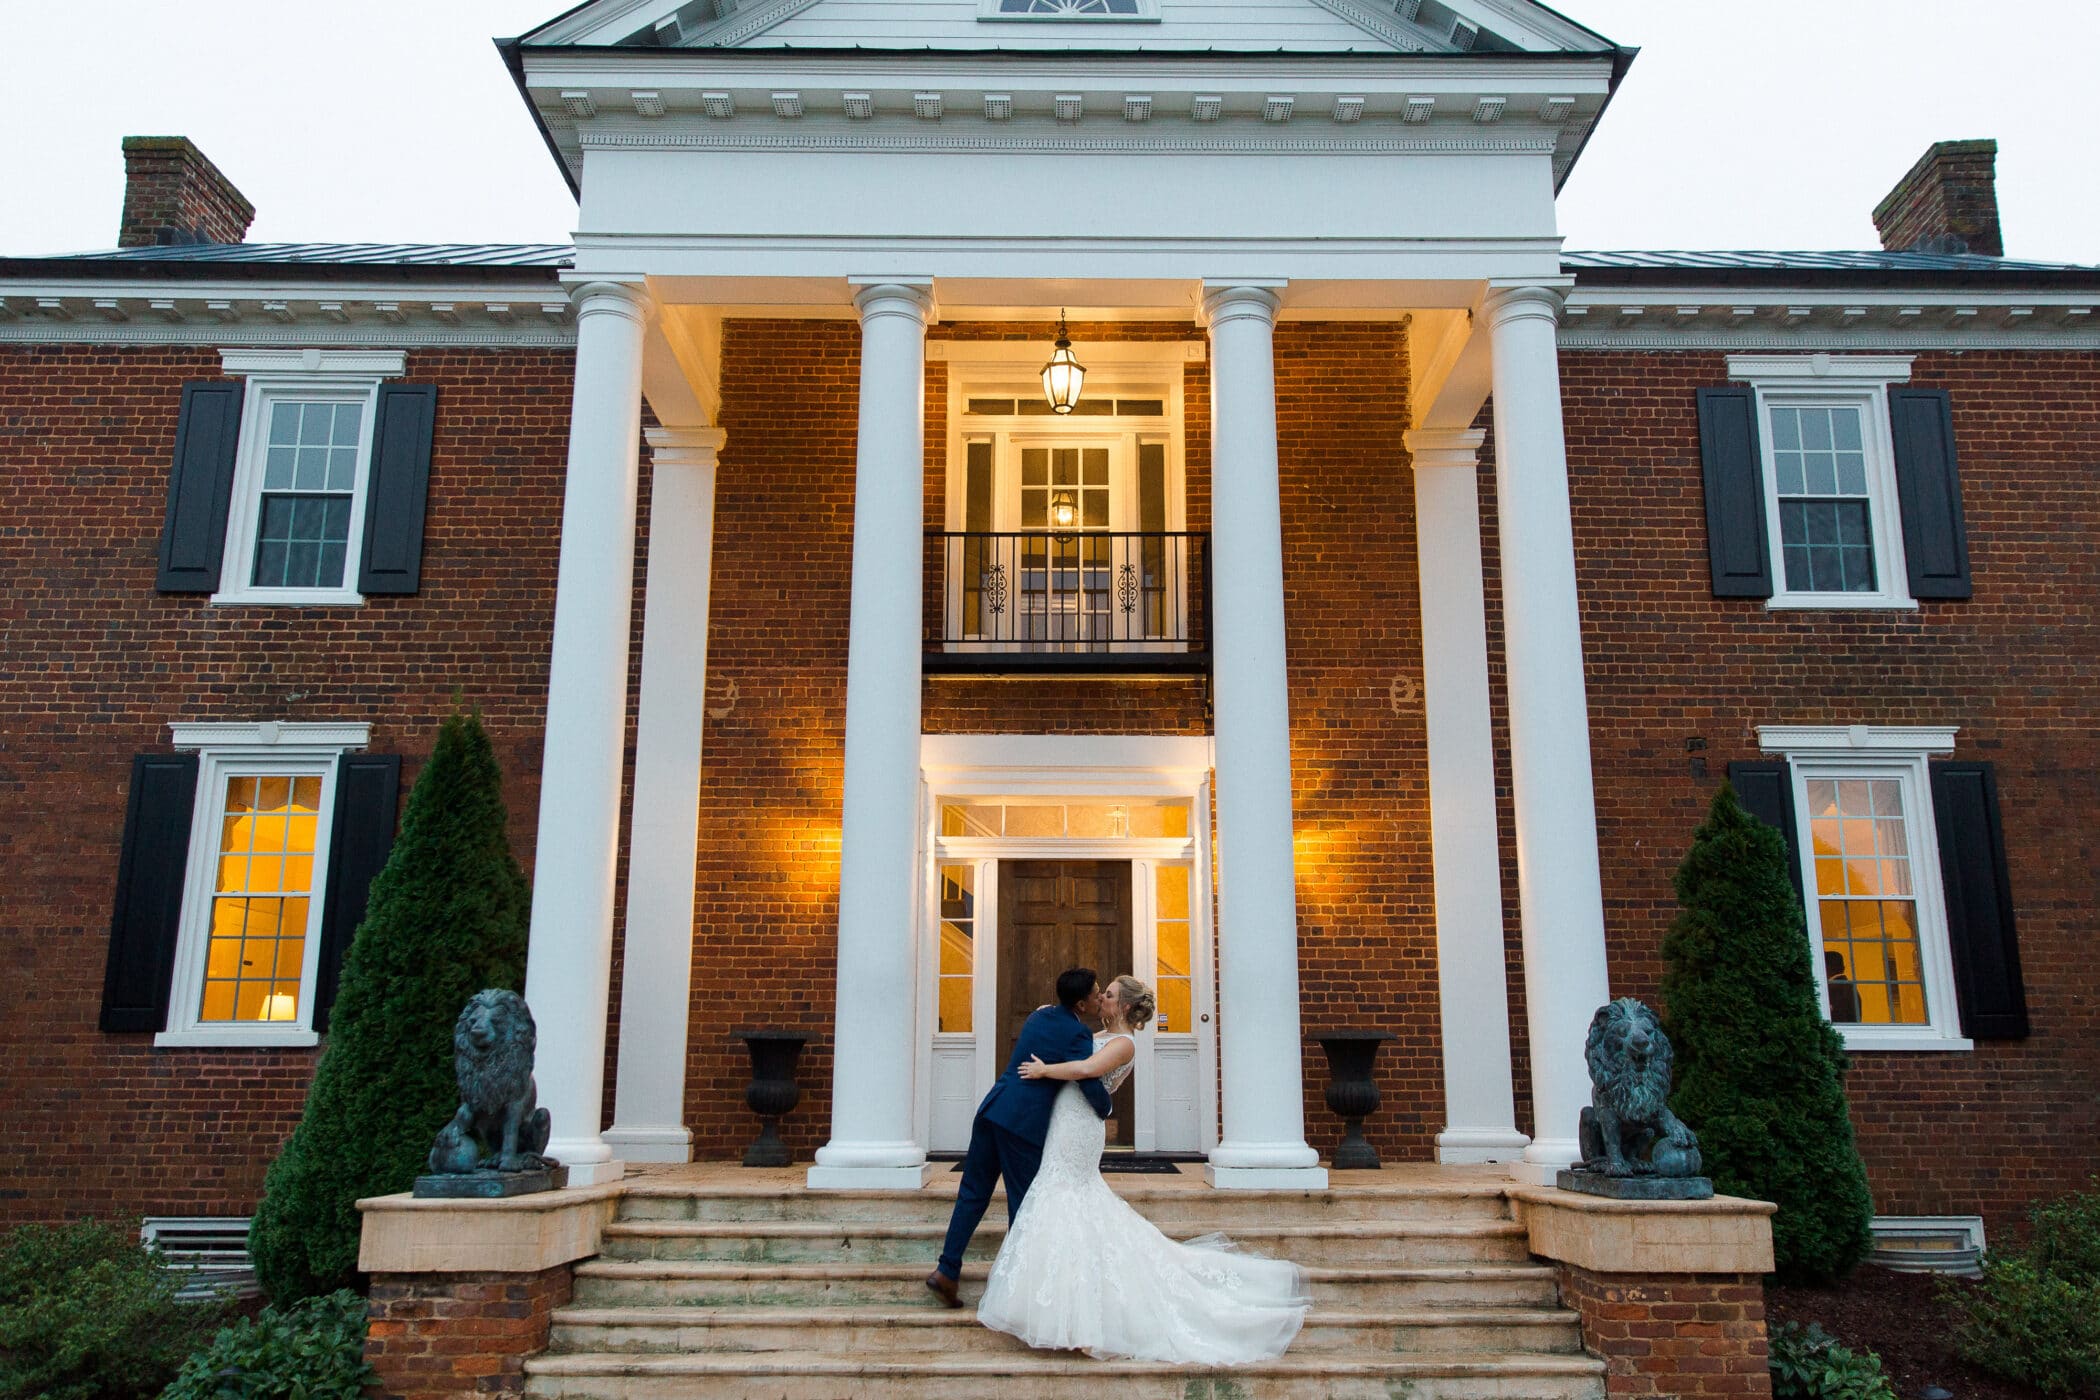 Selecting Your Virginia Wedding Venue | Entwined Events | Venue: West Manor Estate in Forest, VA | Photo Credit: Lauren Paige Photography